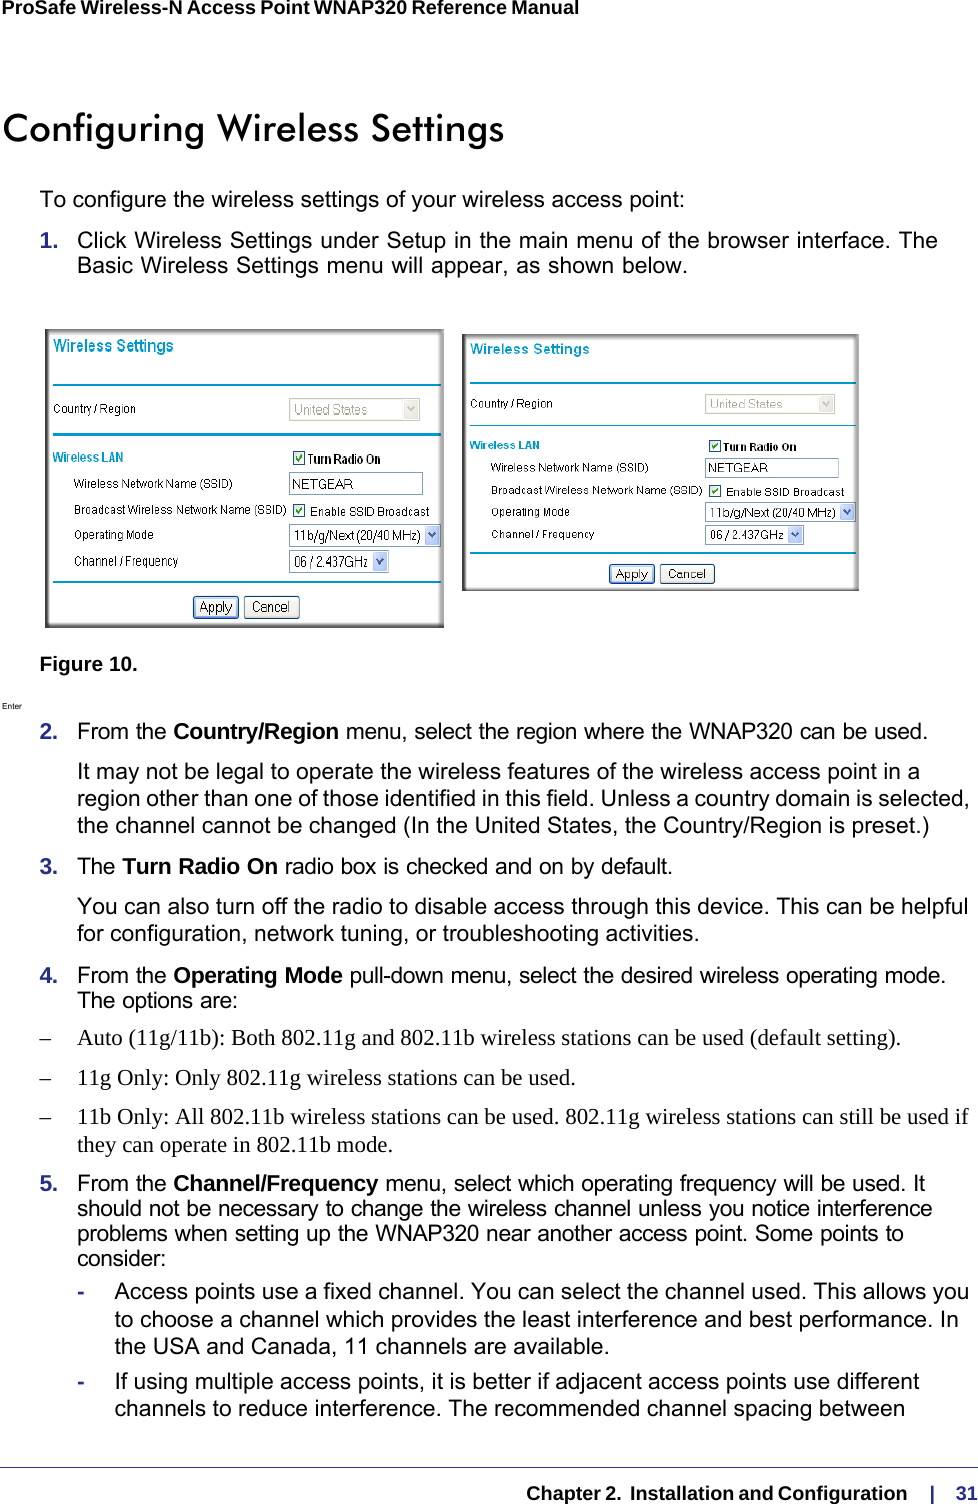   Chapter 2.  Installation and Configuration     |    31ProSafe Wireless-N Access Point WNAP320 Reference Manual Configuring Wireless SettingsTo configure the wireless settings of your wireless access point:1.  Click Wireless Settings under Setup in the main menu of the browser interface. The Basic Wireless Settings menu will appear, as shown below.Figure 10. Enter 2.  From the Country/Region menu, select the region where the WNAP320 can be used. It may not be legal to operate the wireless features of the wireless access point in a region other than one of those identified in this field. Unless a country domain is selected, the channel cannot be changed (In the United States, the Country/Region is preset.)3.  The Turn Radio On radio box is checked and on by default. You can also turn off the radio to disable access through this device. This can be helpful for configuration, network tuning, or troubleshooting activities.4.  From the Operating Mode pull-down menu, select the desired wireless operating mode. The options are:– Auto (11g/11b): Both 802.11g and 802.11b wireless stations can be used (default setting).–11g Only: Only 802.11g wireless stations can be used. – 11b Only: All 802.11b wireless stations can be used. 802.11g wireless stations can still be used if they can operate in 802.11b mode. 5.  From the Channel/Frequency menu, select which operating frequency will be used. It should not be necessary to change the wireless channel unless you notice interference problems when setting up the WNAP320 near another access point. Some points to consider:-Access points use a fixed channel. You can select the channel used. This allows you to choose a channel which provides the least interference and best performance. In the USA and Canada, 11 channels are available. -If using multiple access points, it is better if adjacent access points use different channels to reduce interference. The recommended channel spacing between 